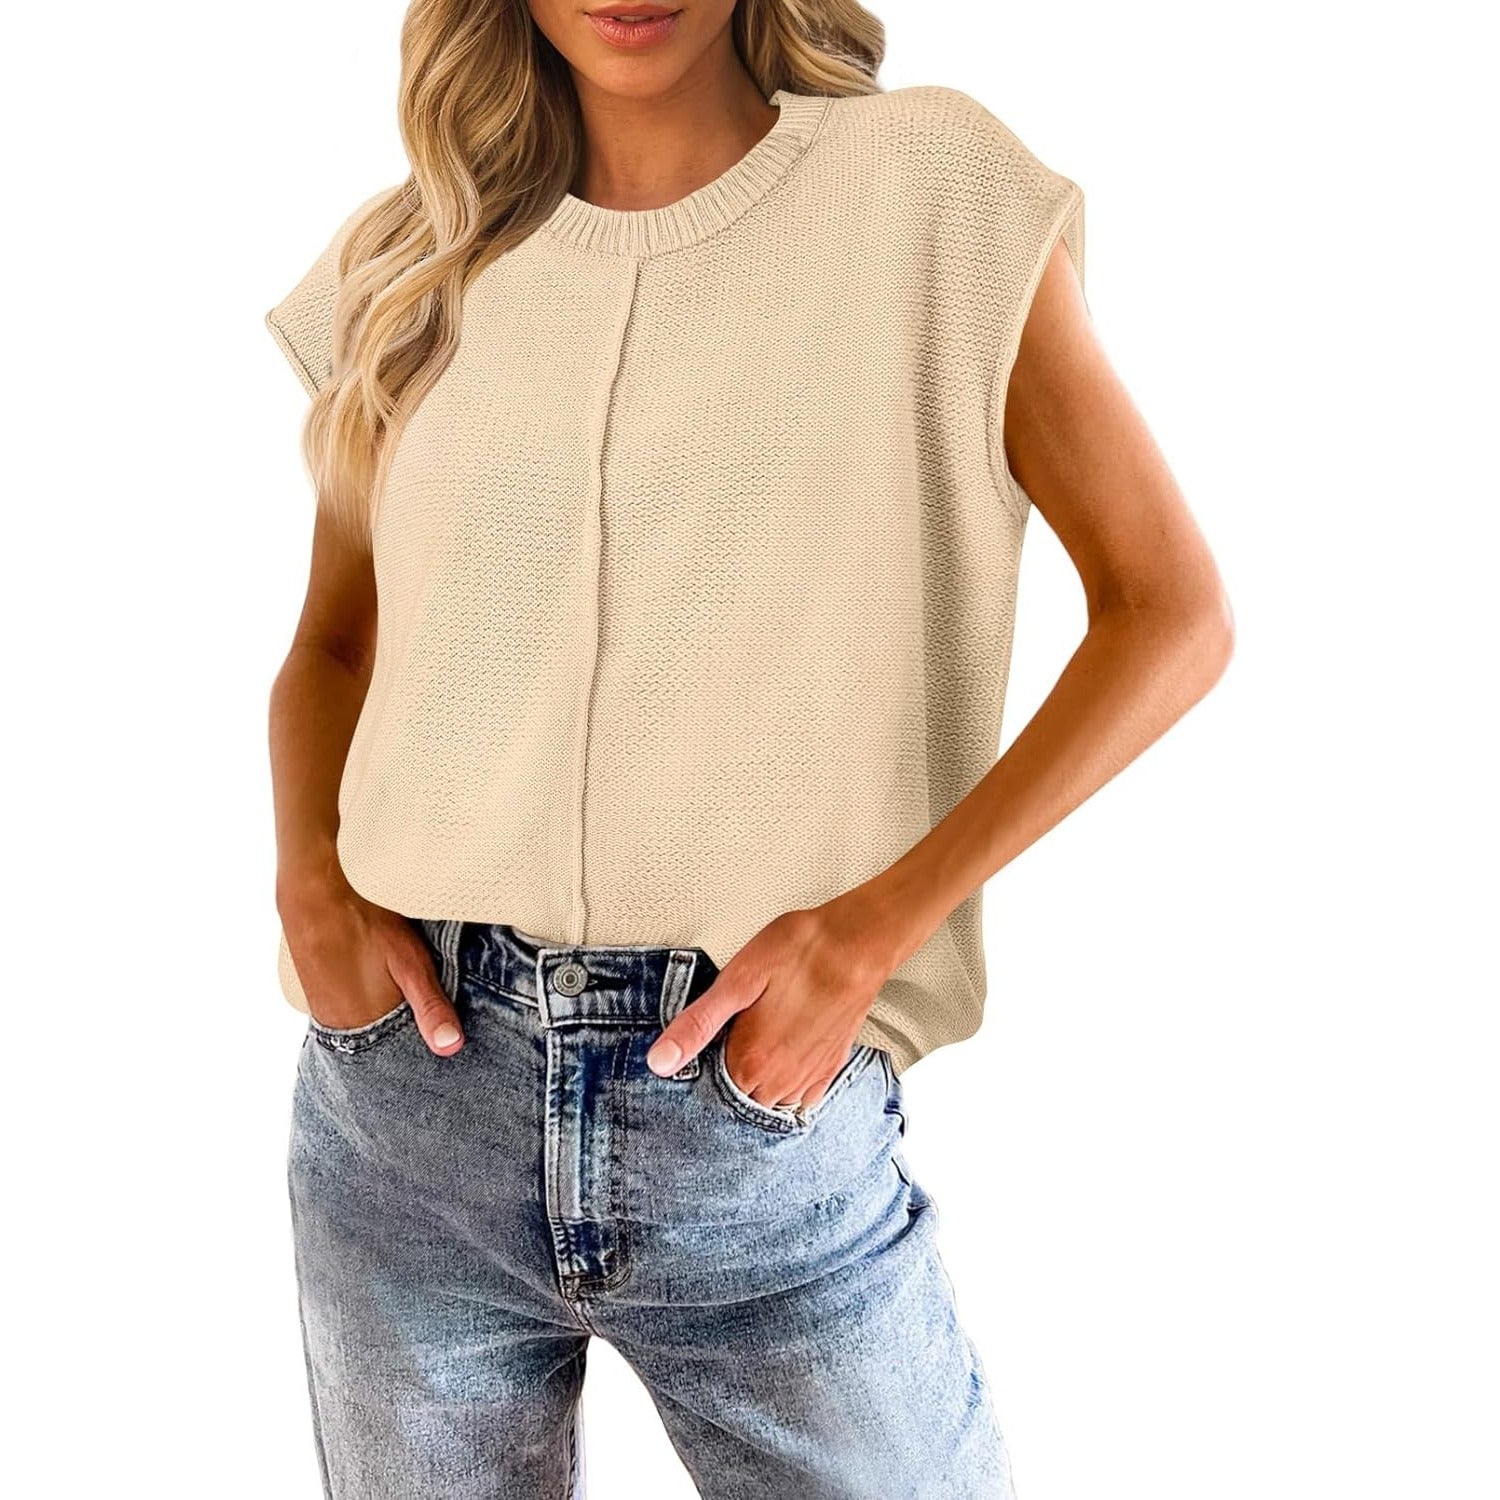 Women's Summer Cap Sleeve Crewneck Tops Casual Loose Fit Knit Sweater Pullover Tank Top